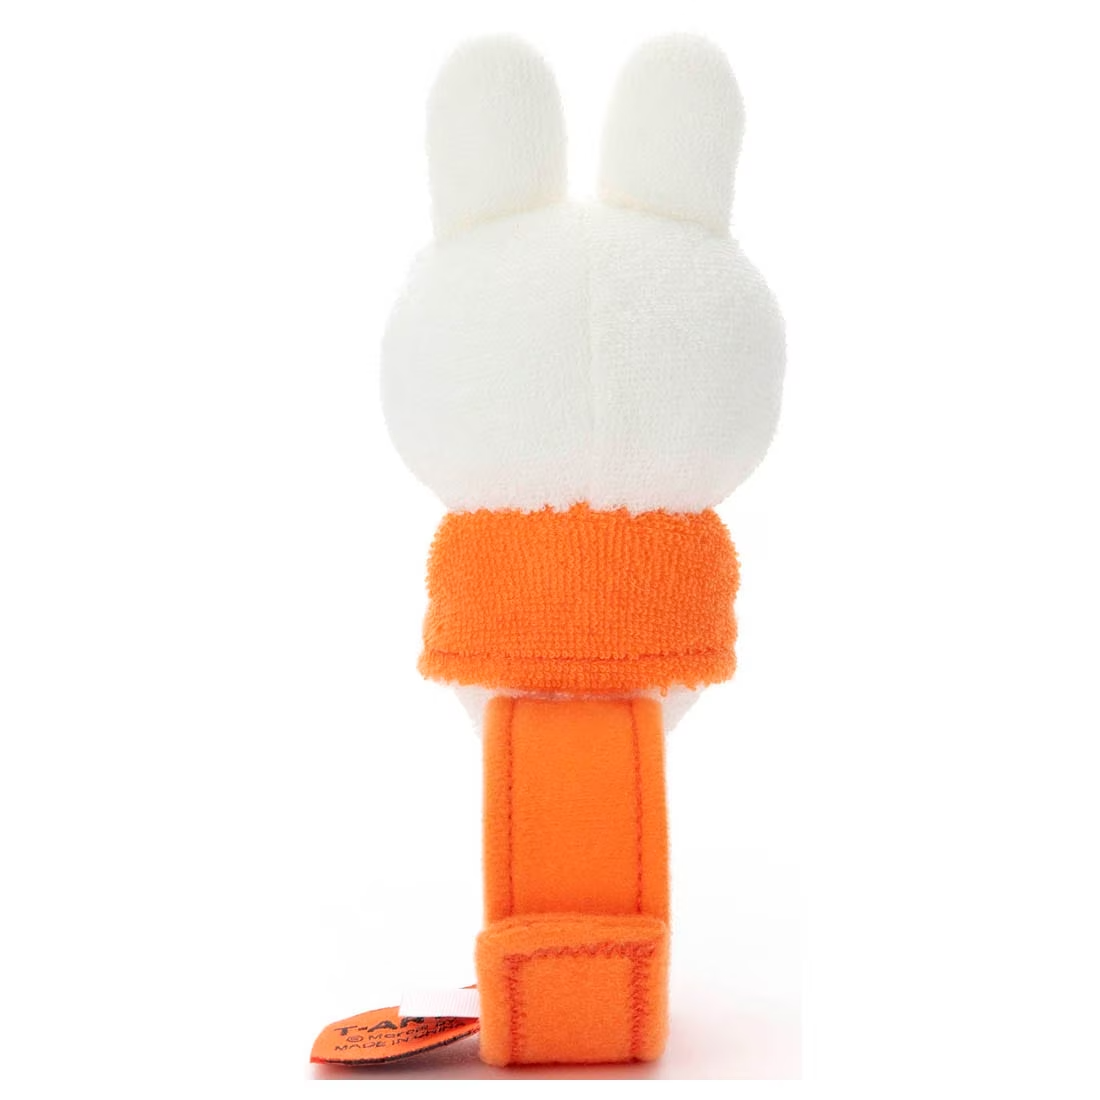 My First Bruna Plush Bell Rattle Stroller Toys 2m+ Miffy